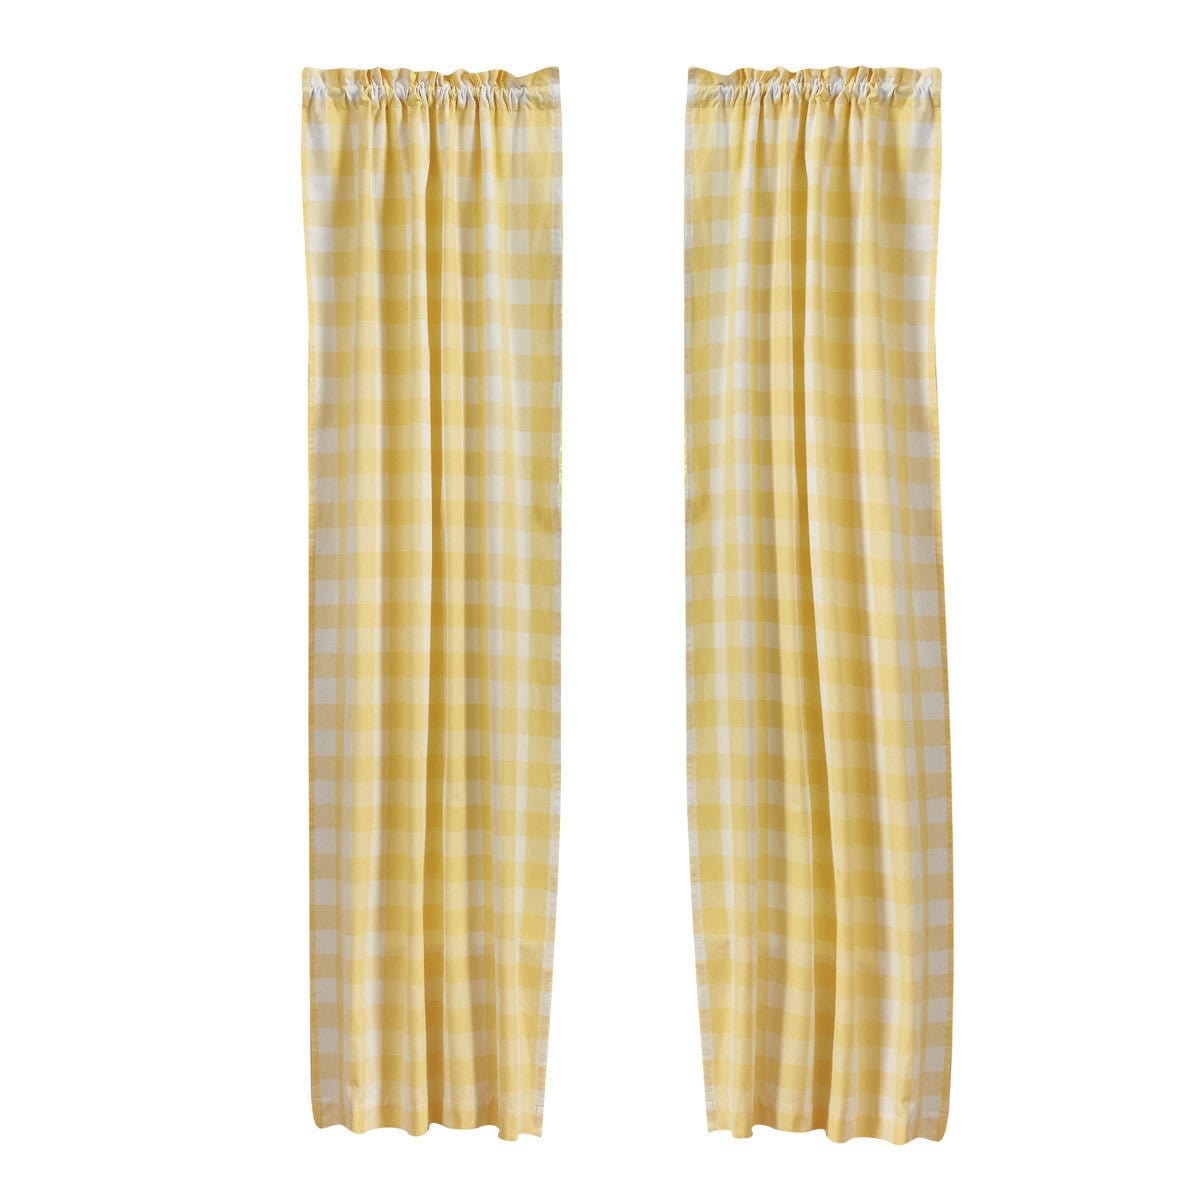 Wicklow Check in Yellow Panel Pair With Tie Backs 84" Long Lined-Park Designs-The Village Merchant